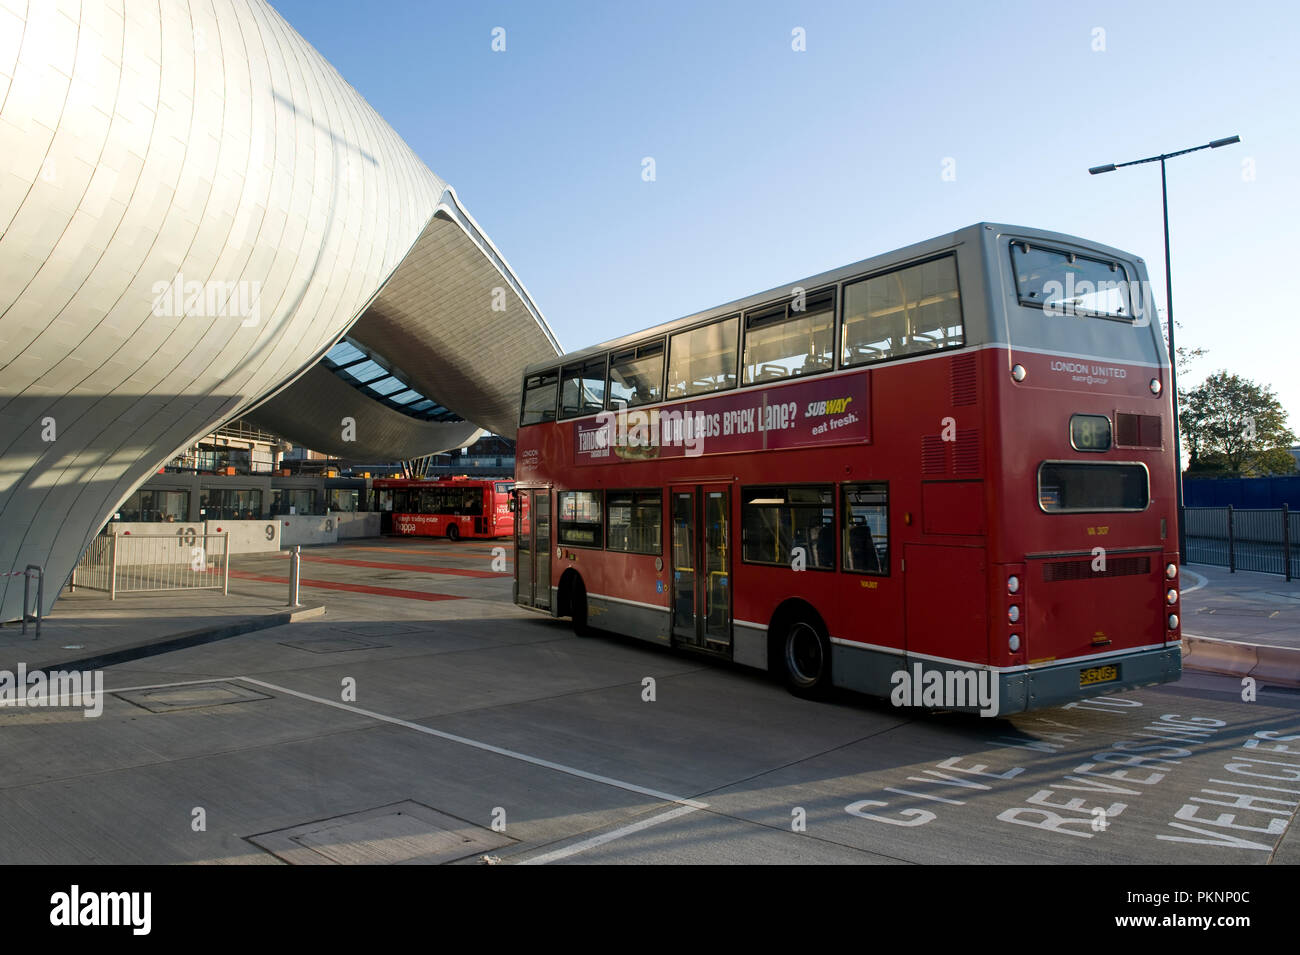 The new Slough Bus Station, part of the Heart of Slough regeneration project 30/09/2011 ©Stan Kujawa stan.pix@virgin.net Stock Photo